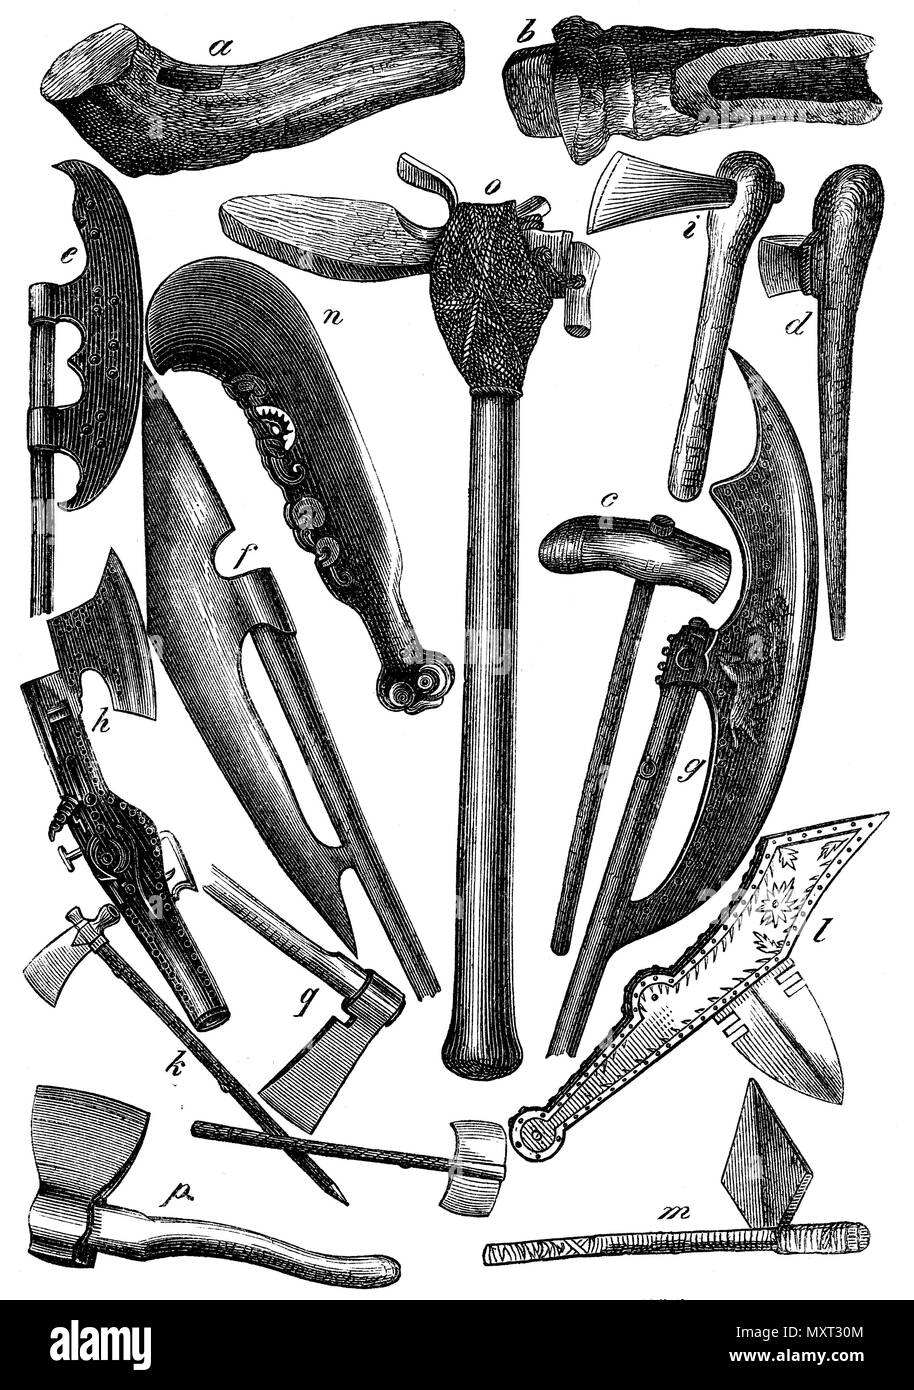 Axes of different times and peoples. a) stag horn ax, b) stone ax, c) cleaver, d) holm ax from the age of stilt houses, e) stone ax Schamyl's, f, g, h) Old Russian battle ax (from Tsarskoe Selo), i, k, l, m) Indian battle-axes , n, o) strike texts of the South Sea Islanders, p, q) German carpenter axes from the present,   1874 Stock Photo